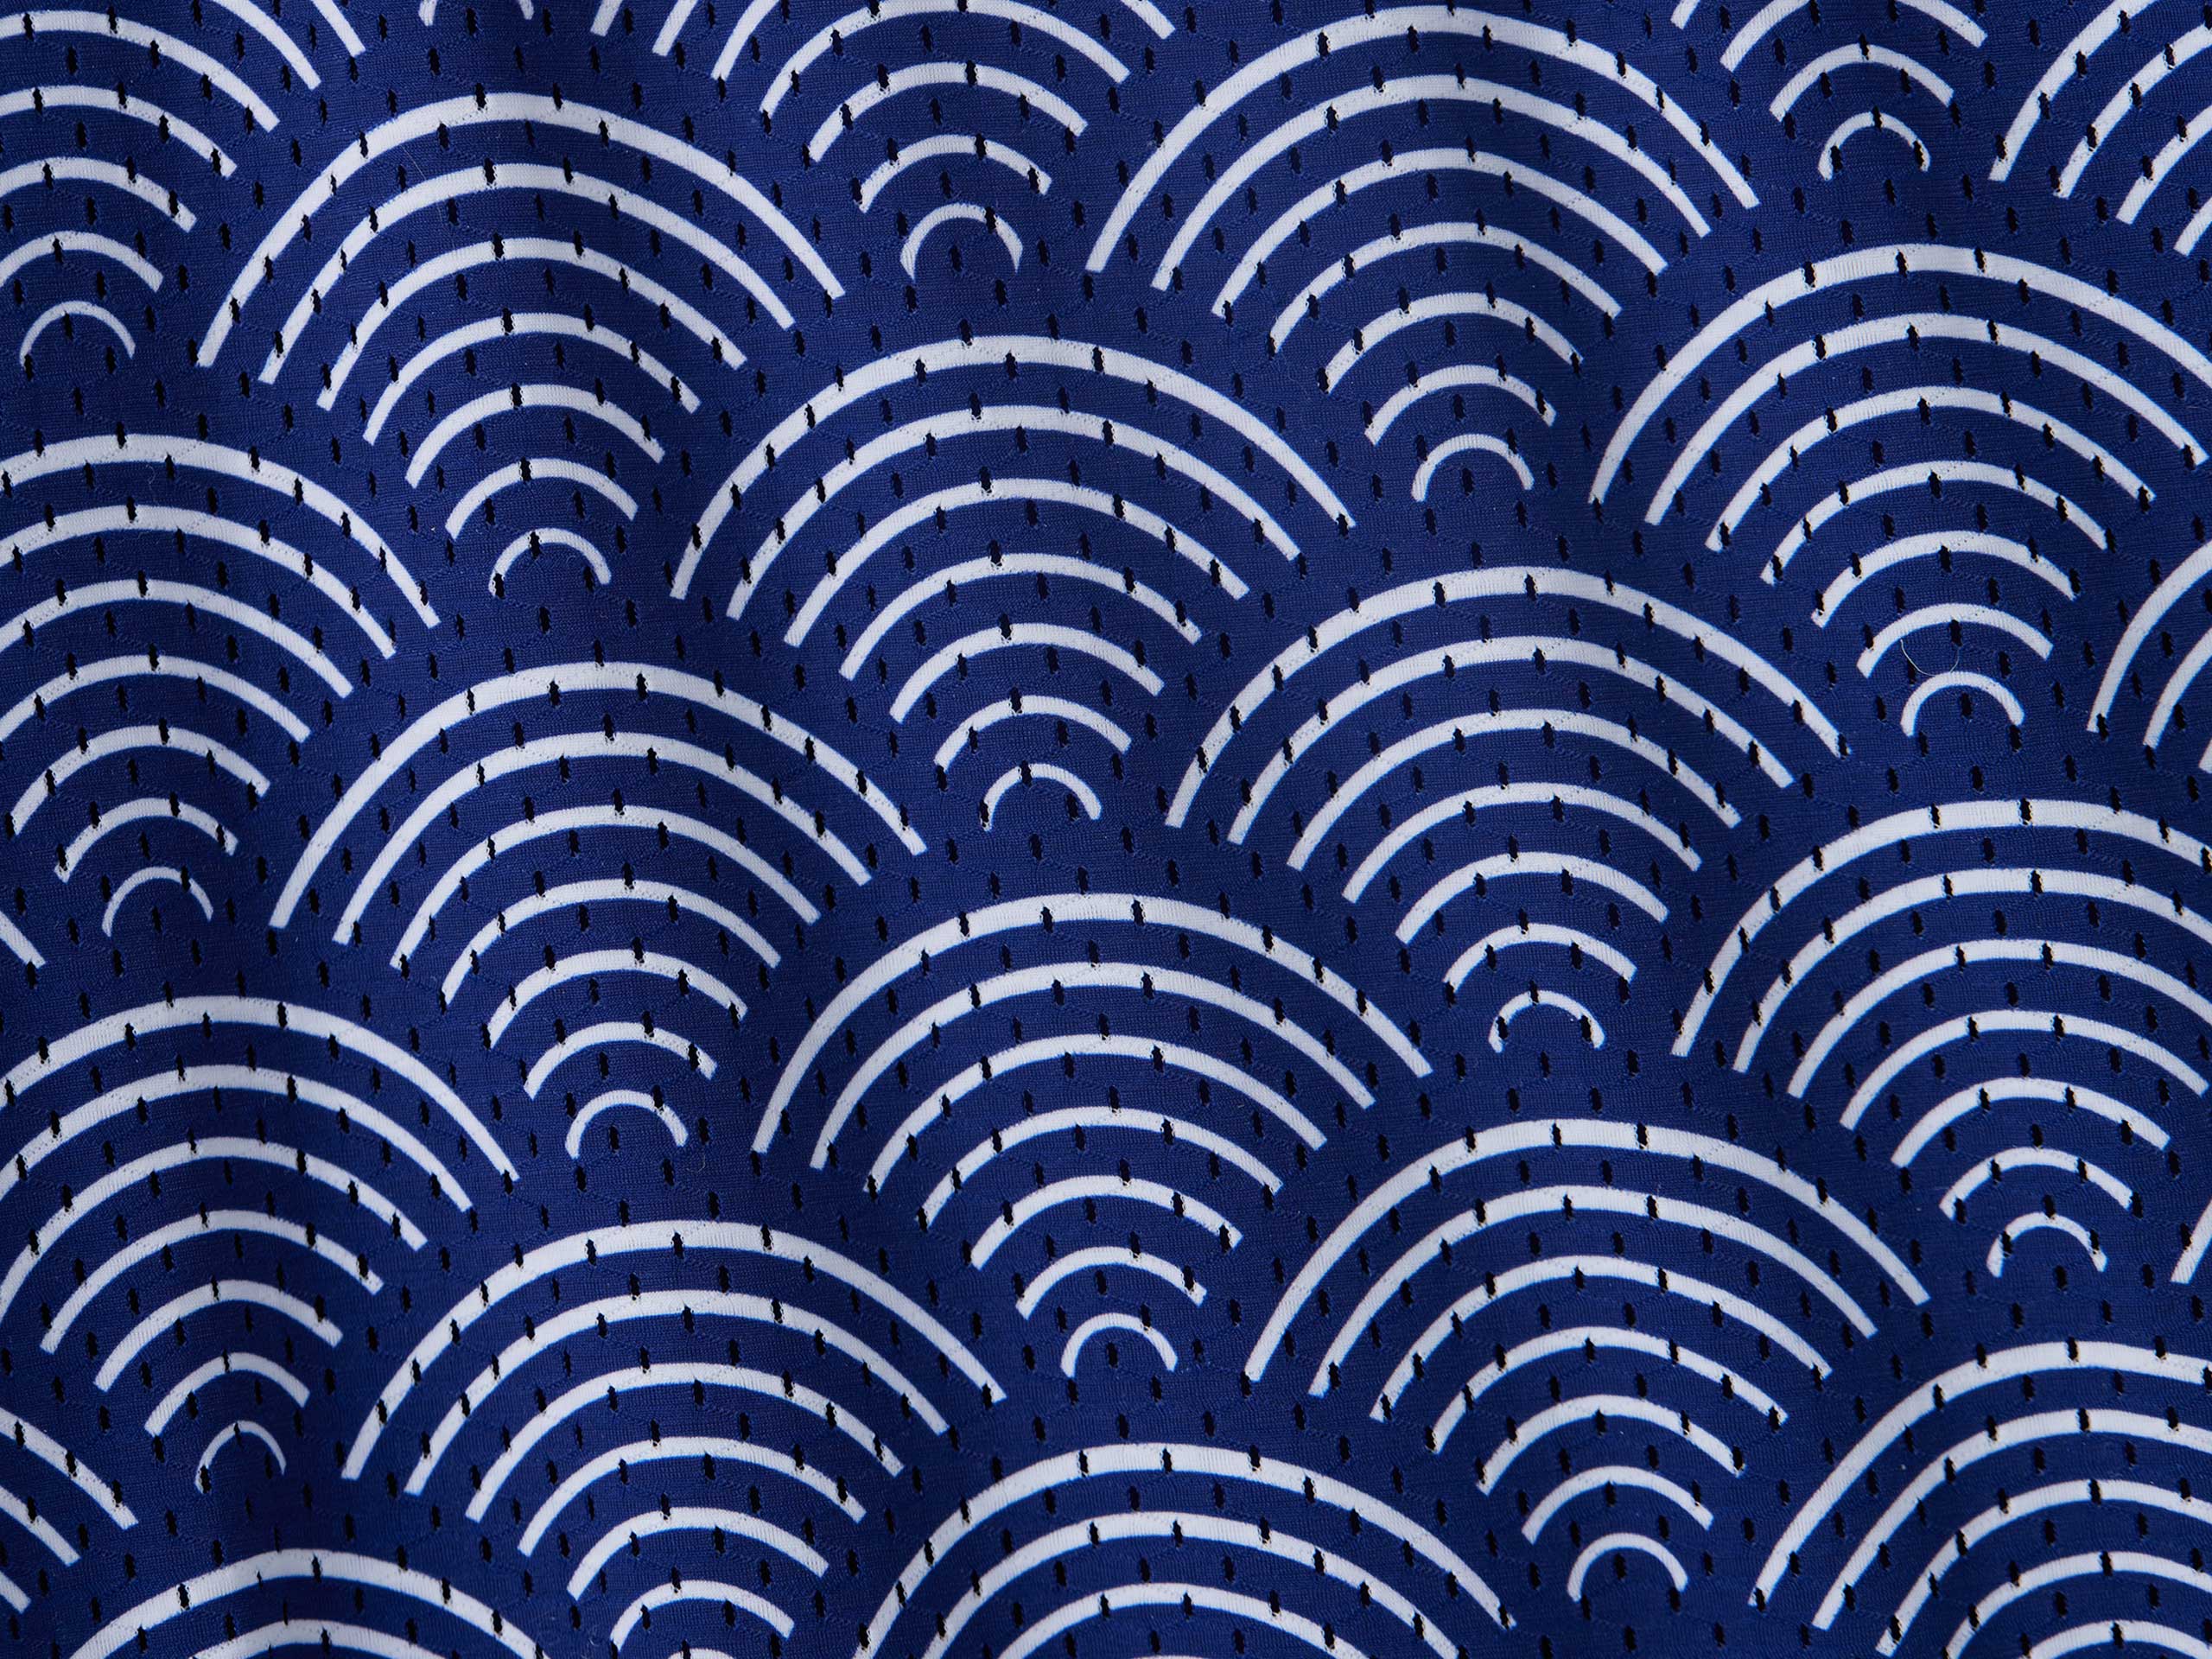 Close up detail shot of mesh material from blue lounge shorts with sunrise pattern.